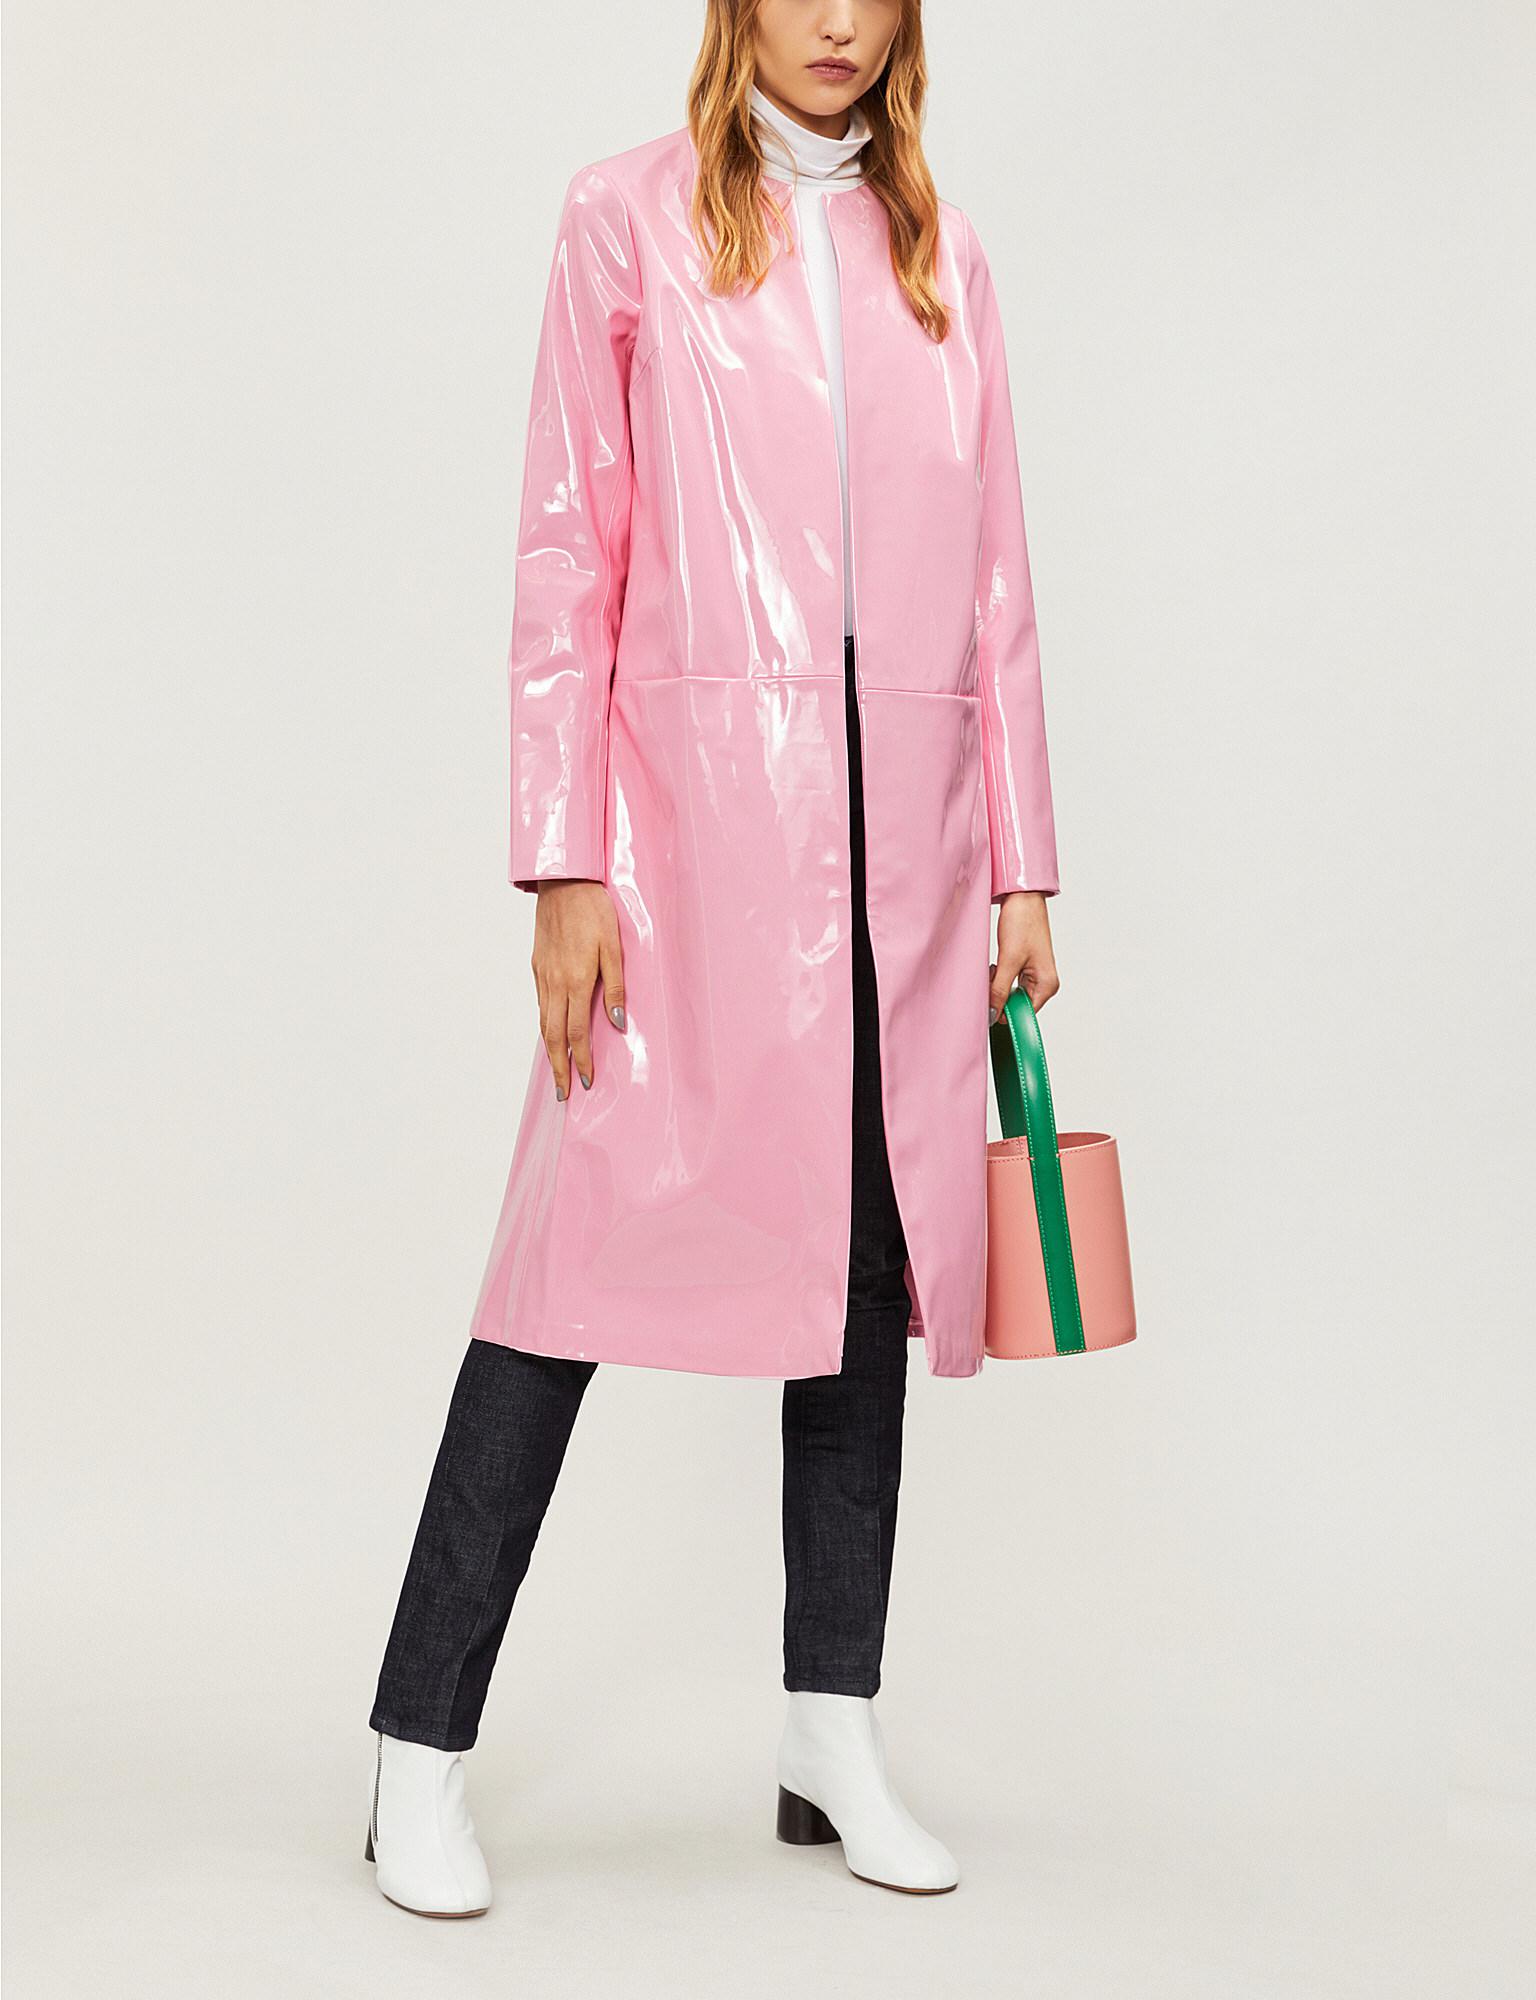 STAUD Liam Faux Patent-leather Coat in Pink | Lyst